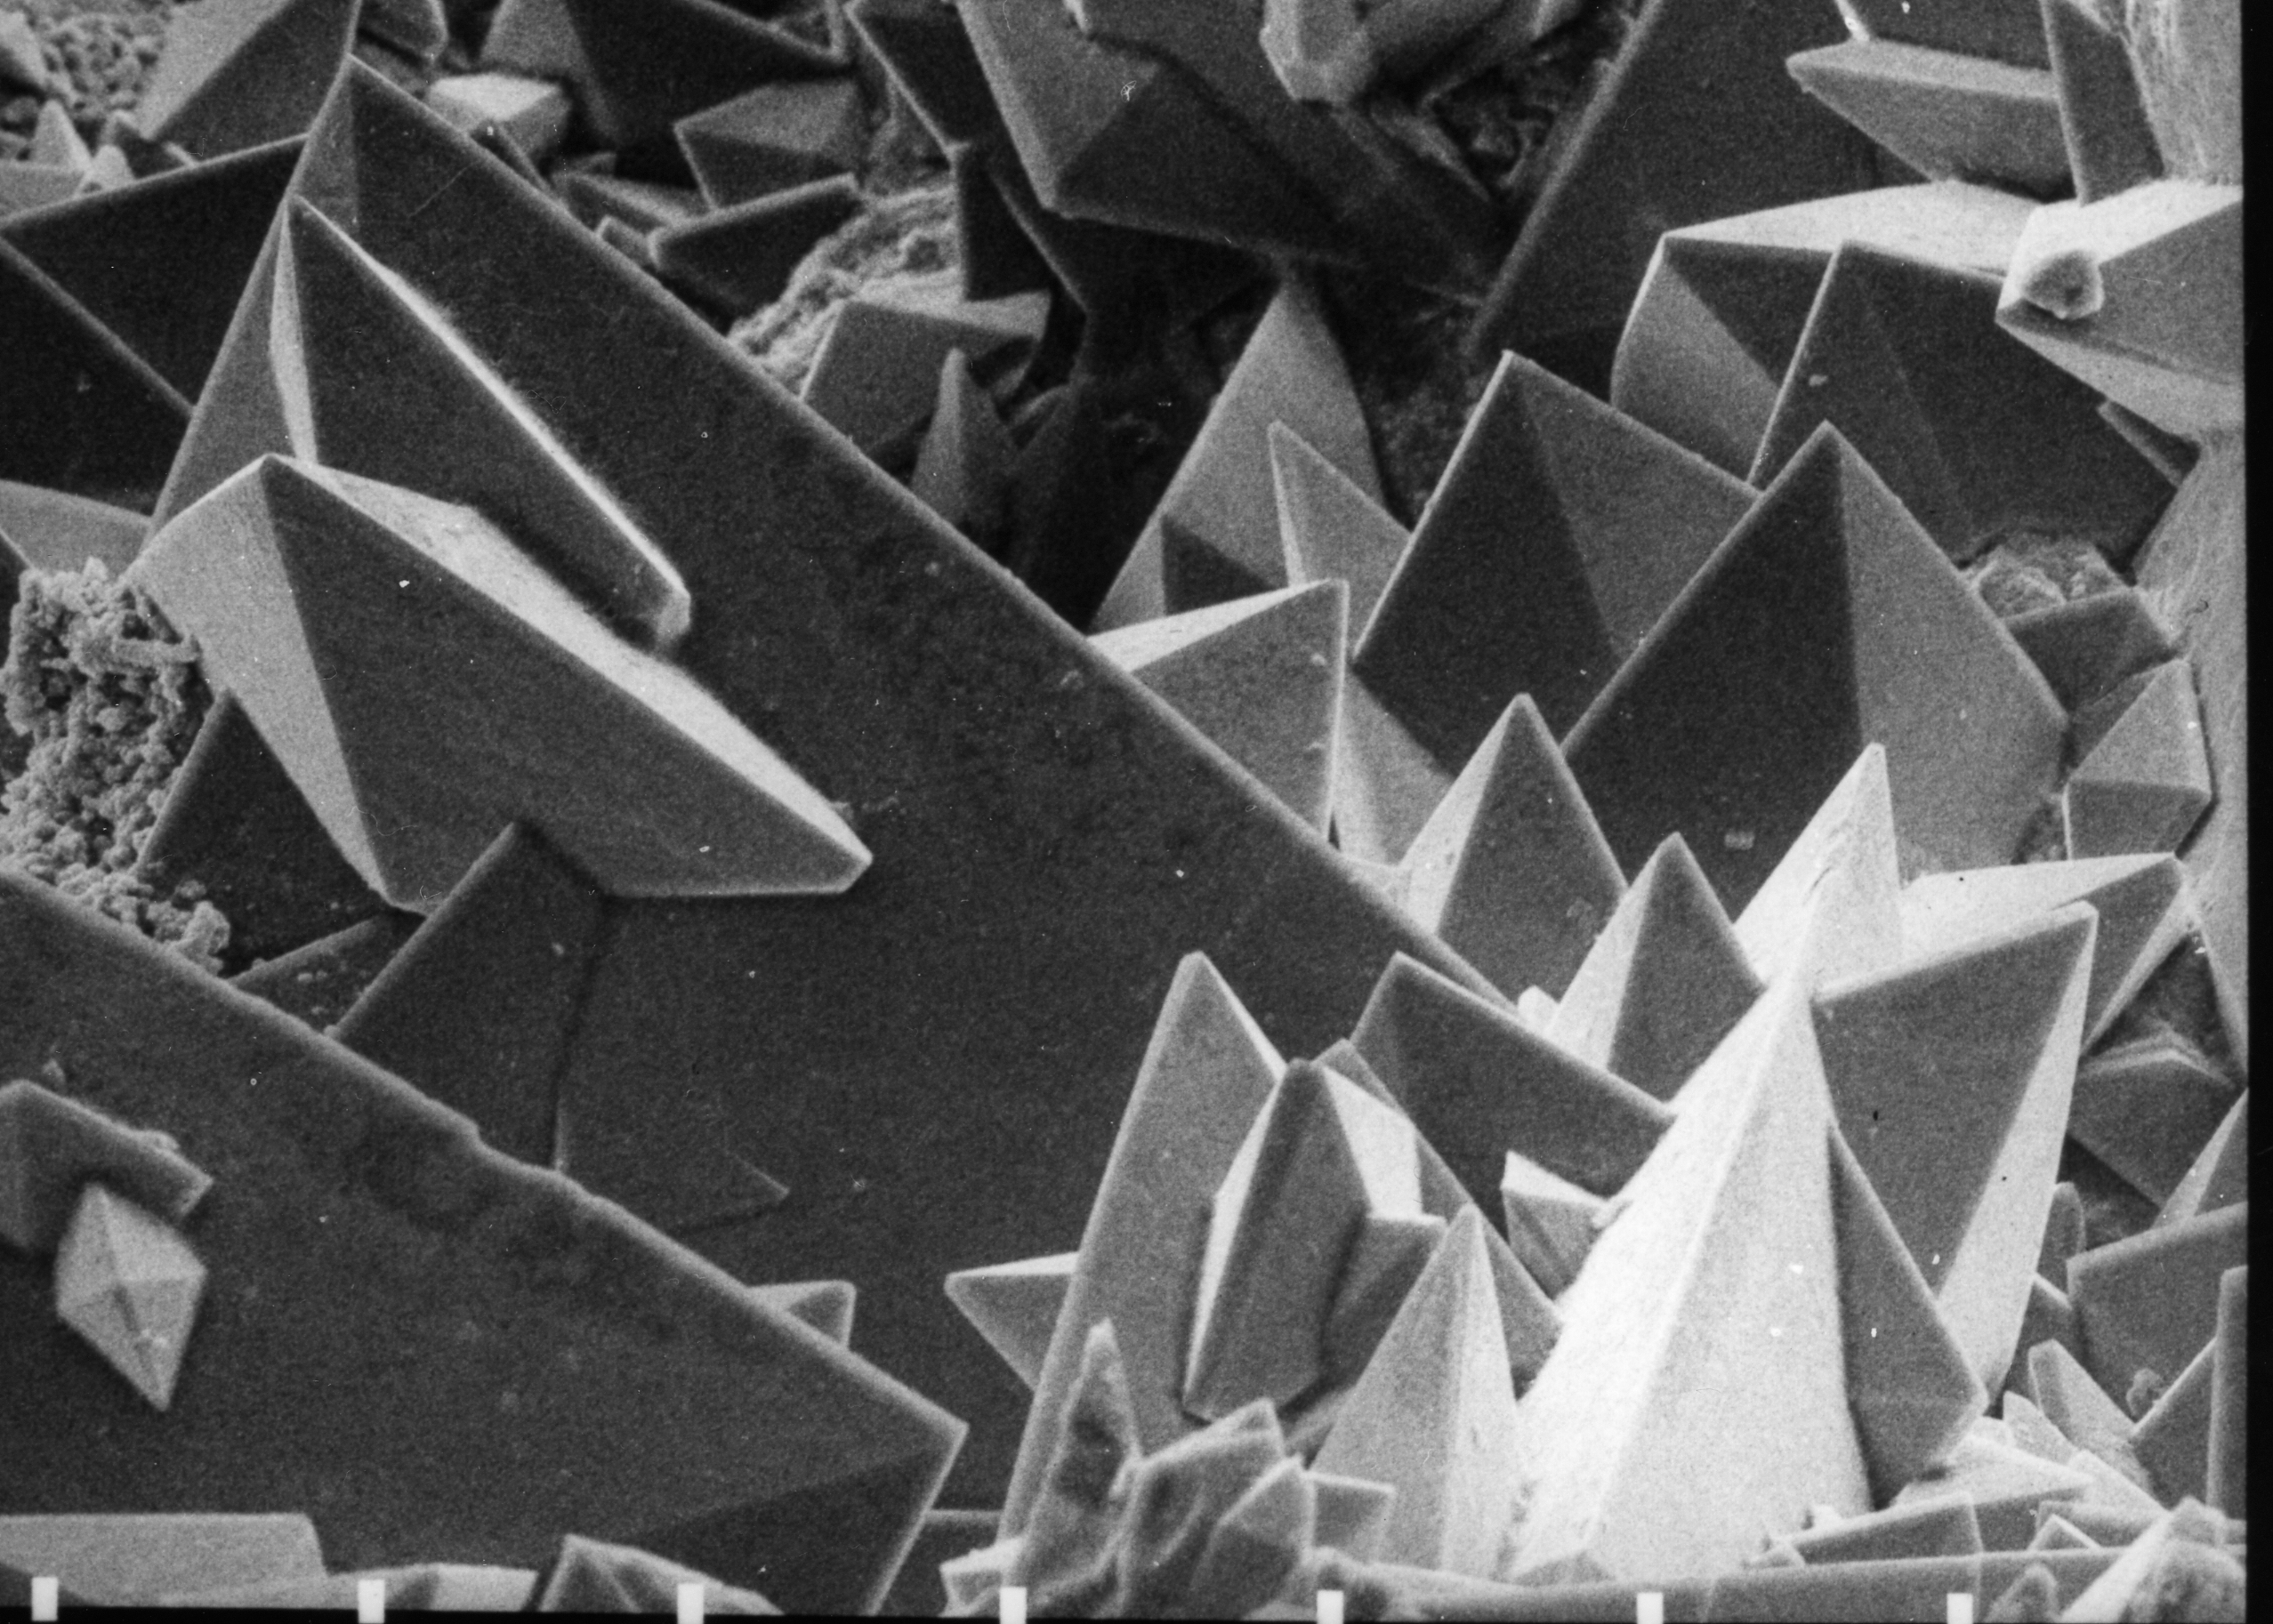 Calcium oxalate dihydrate crystals under Scanning Electron Micrograph (SEM) taken at 30 KV. Source: Wikimedia commons[6]